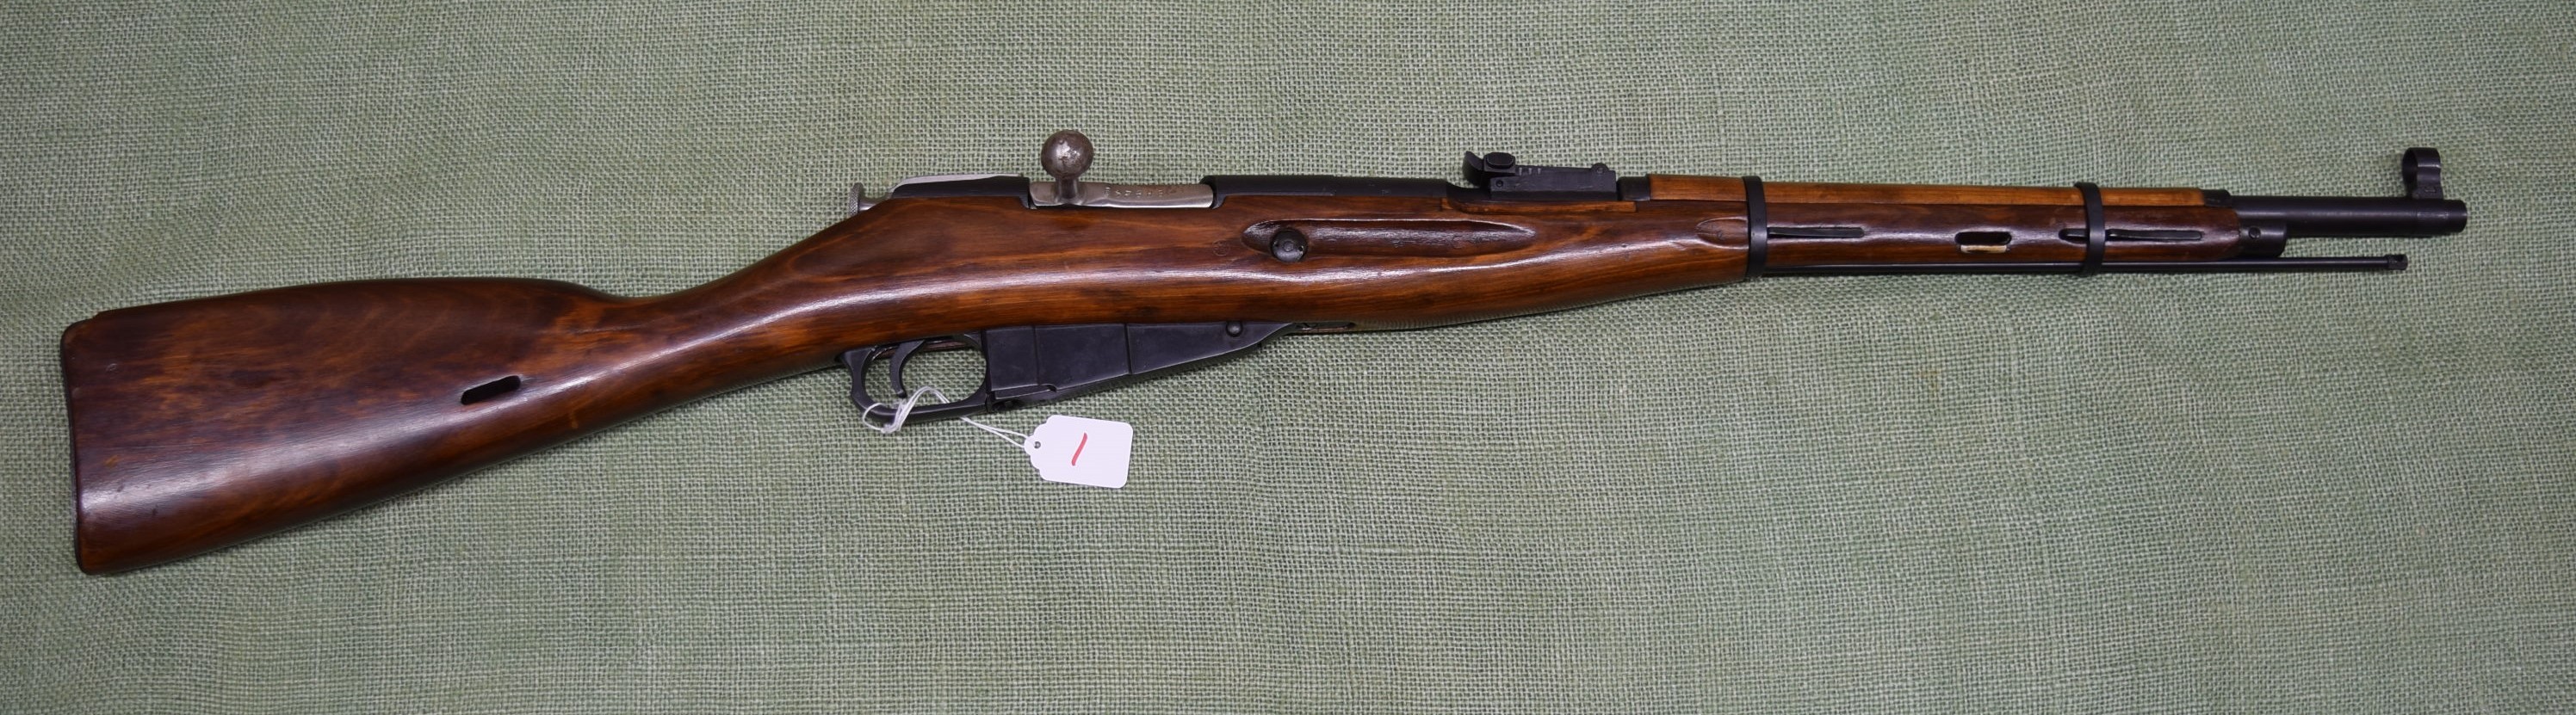 19 Famous Hardwood Floor Refinishing Syracuse Ny 2024 free download hardwood floor refinishing syracuse ny of horst auction upcoming auction with 7 62x54rmm caliber bolt action rifle 20 barrel with a very good bore receiver is dated 1943 this is one of the m